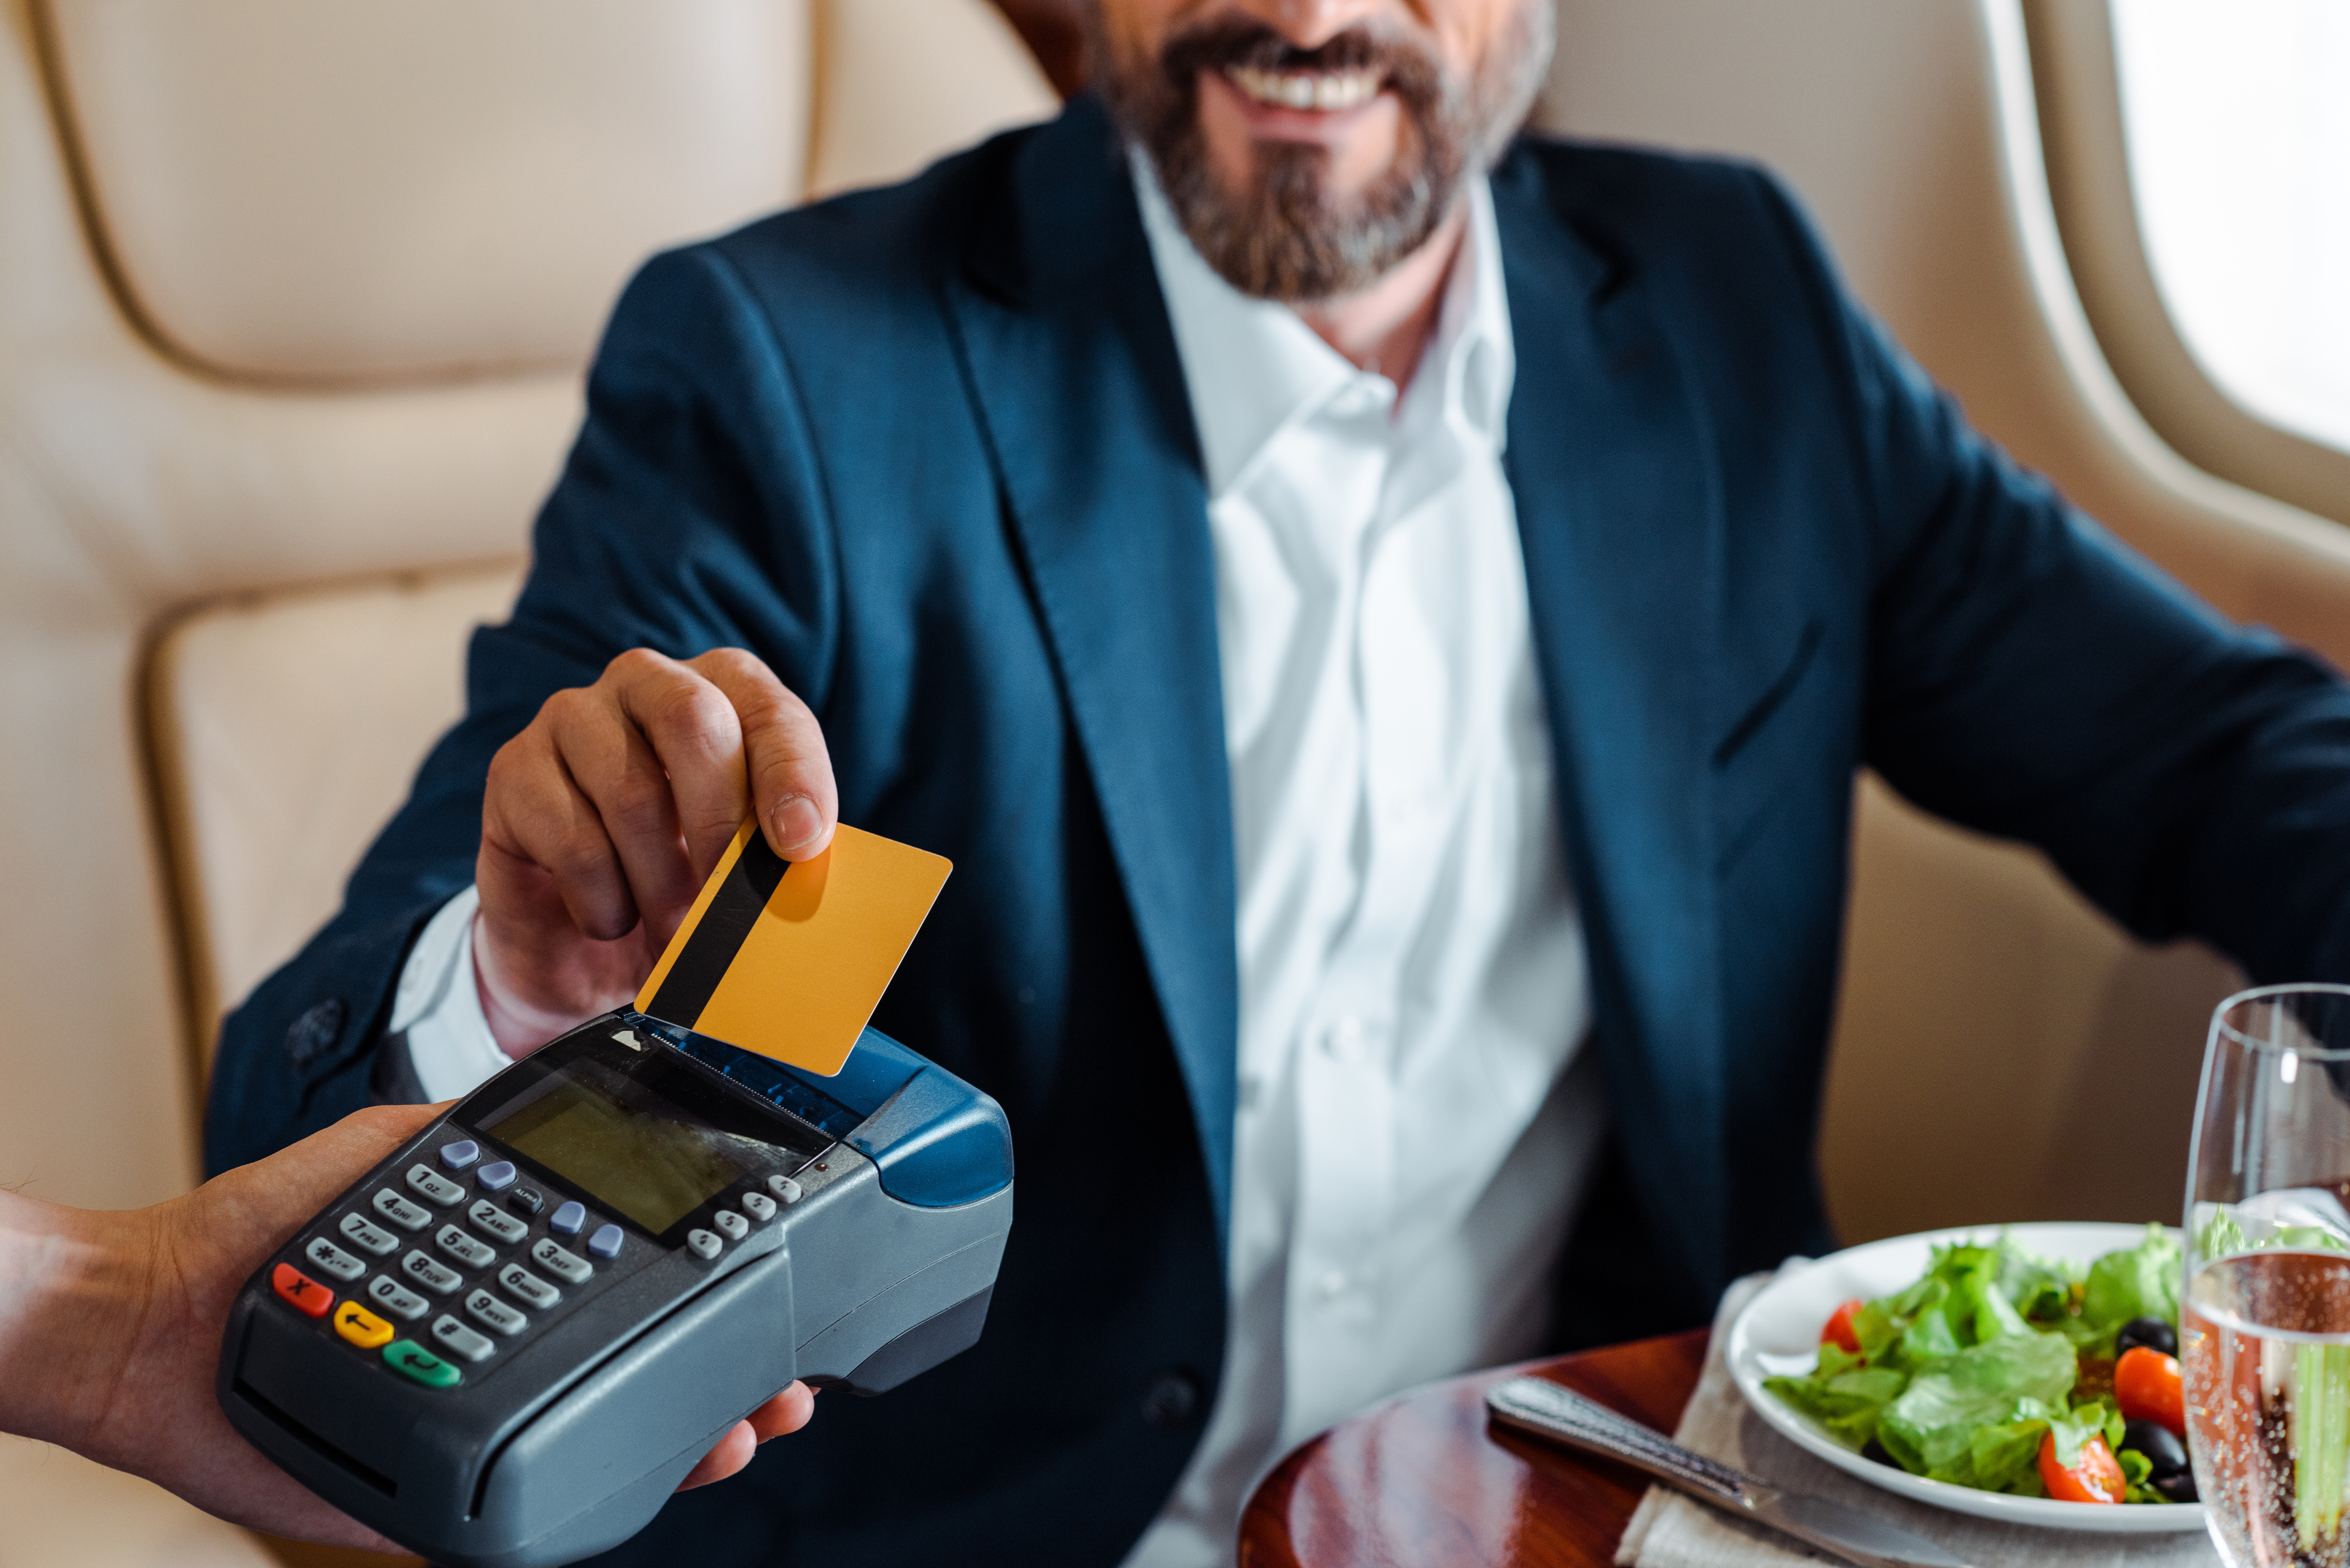 Selective focus of smiling businessman paying with credit card near salad and glass of champagne in airplane